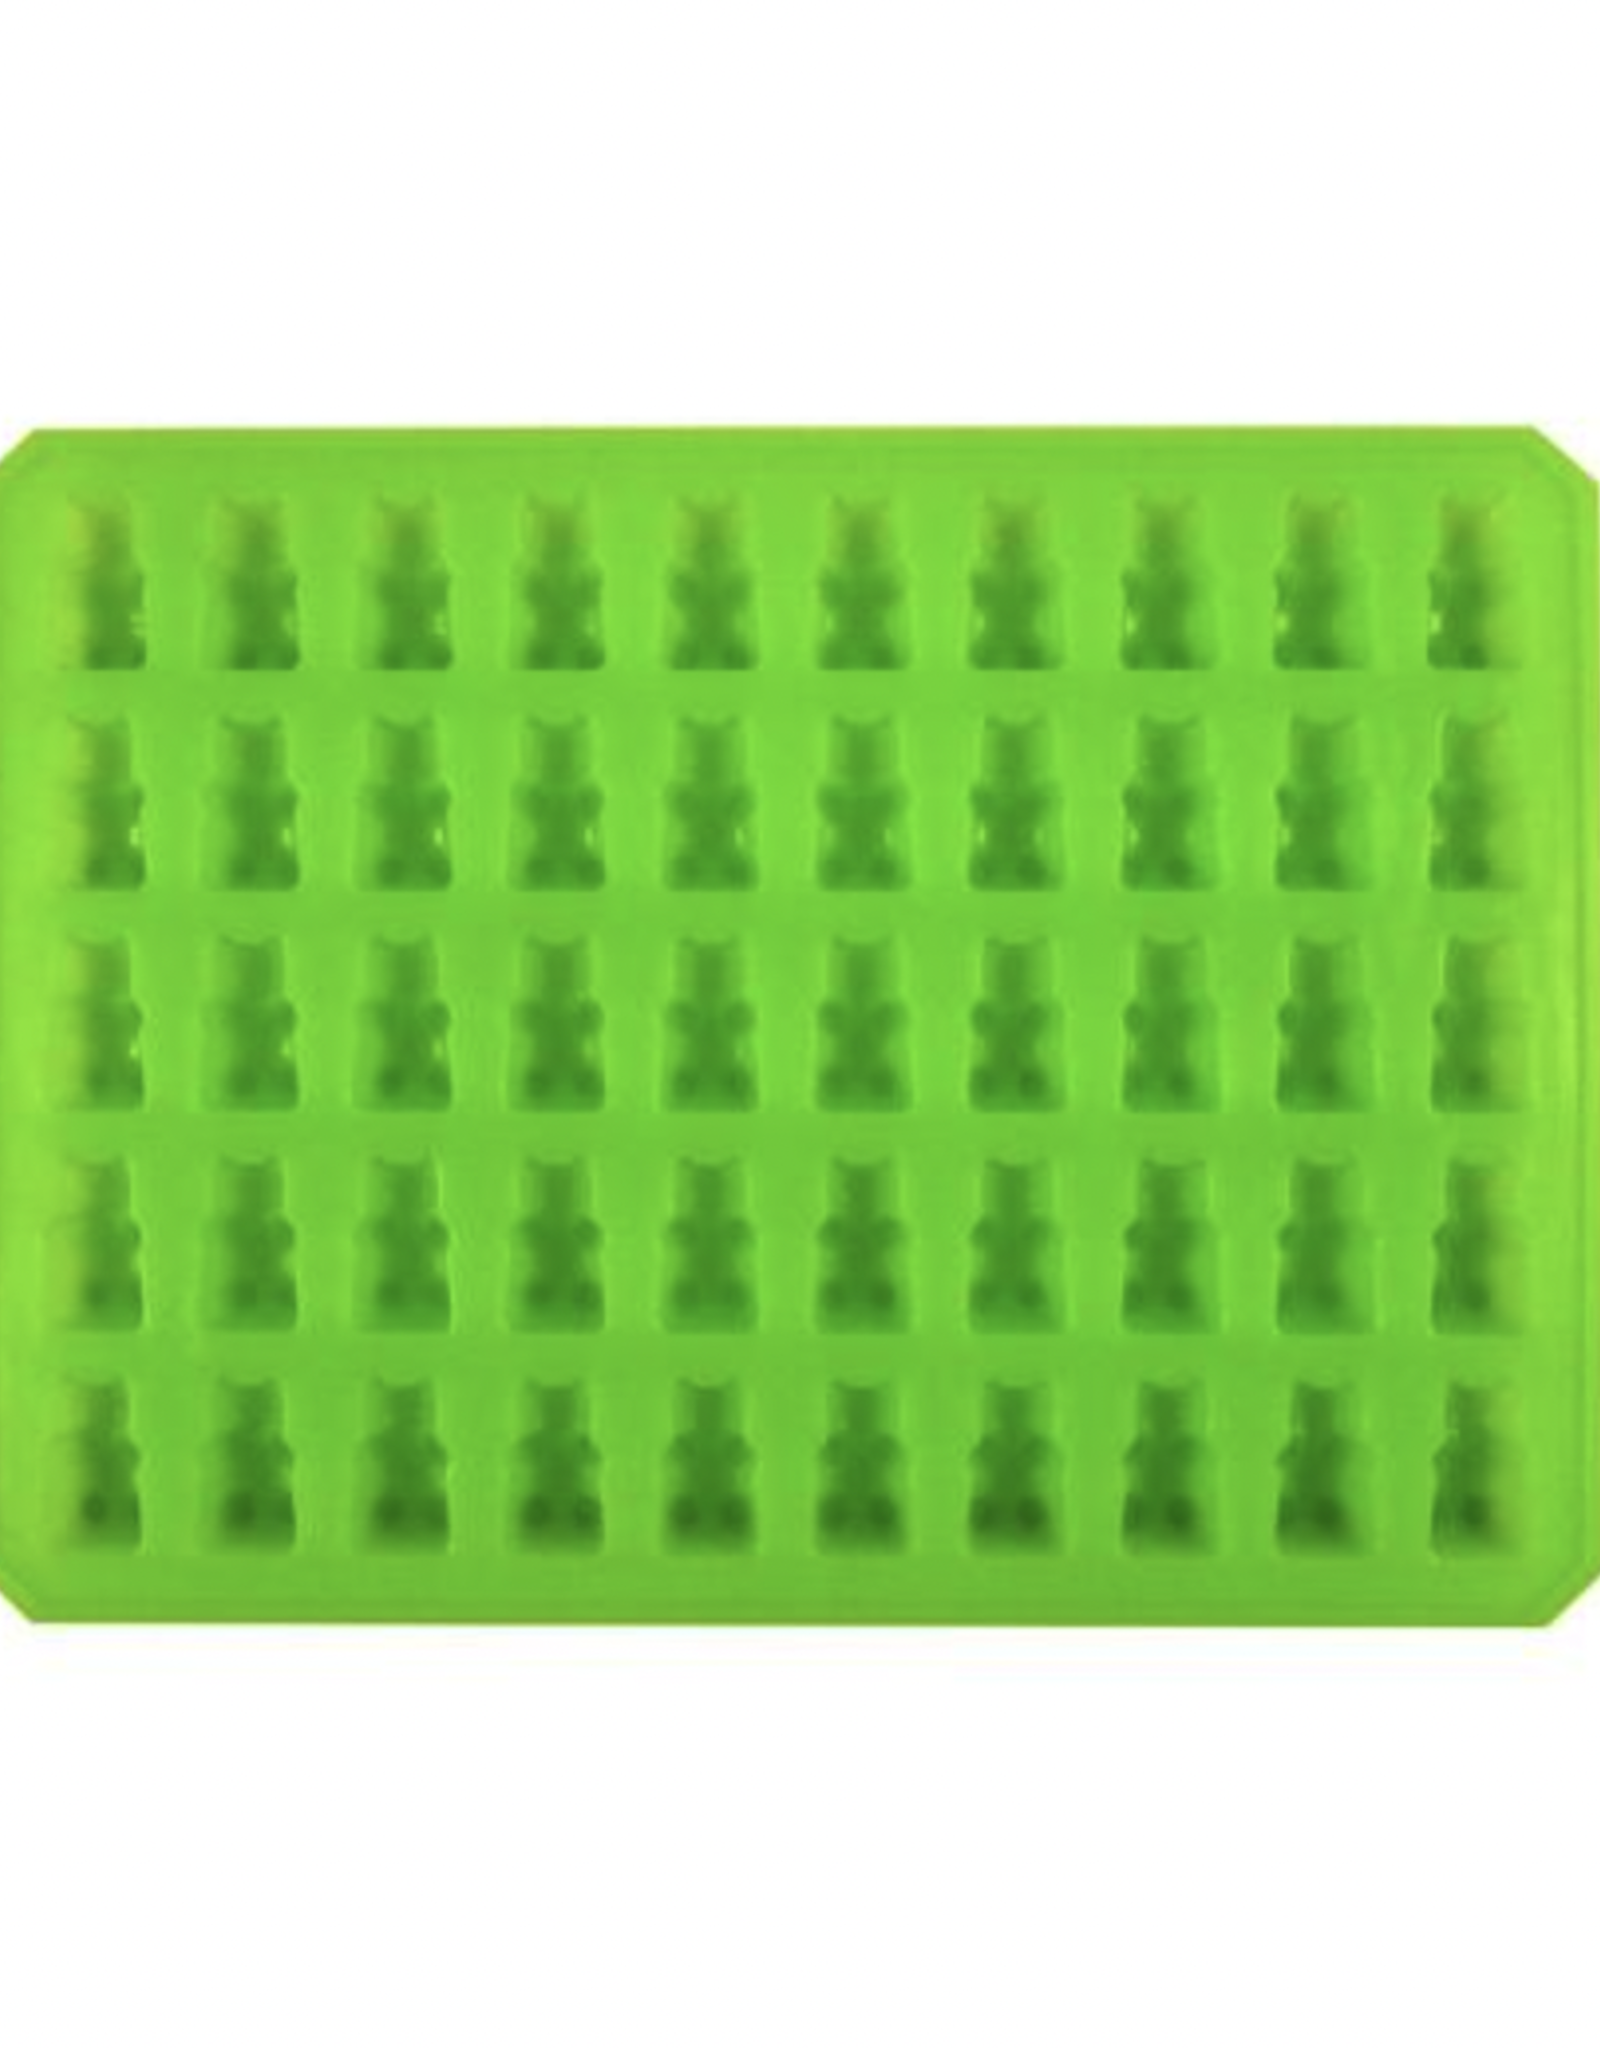 Silicone Classic Gummy Bears Mold by Dope Molds